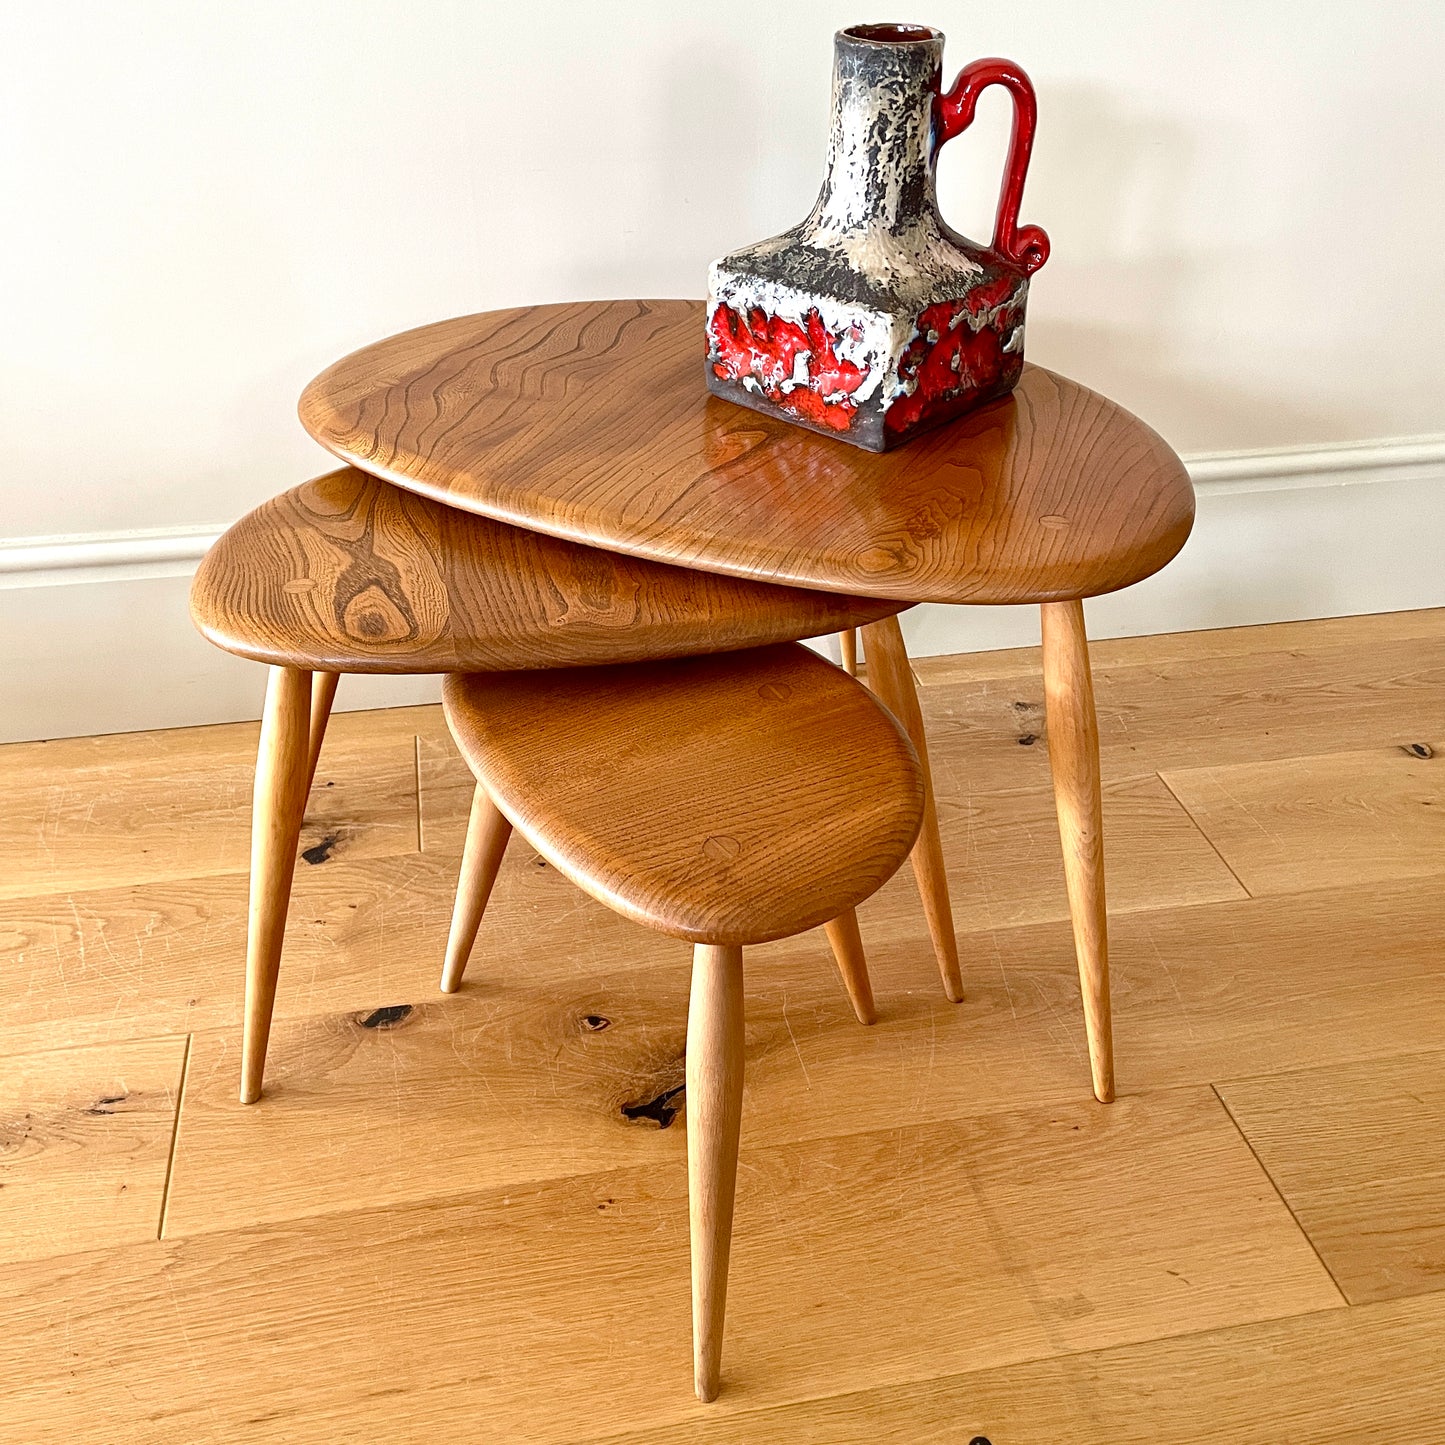 Ercol Blonde Pebble nest of tables No 354